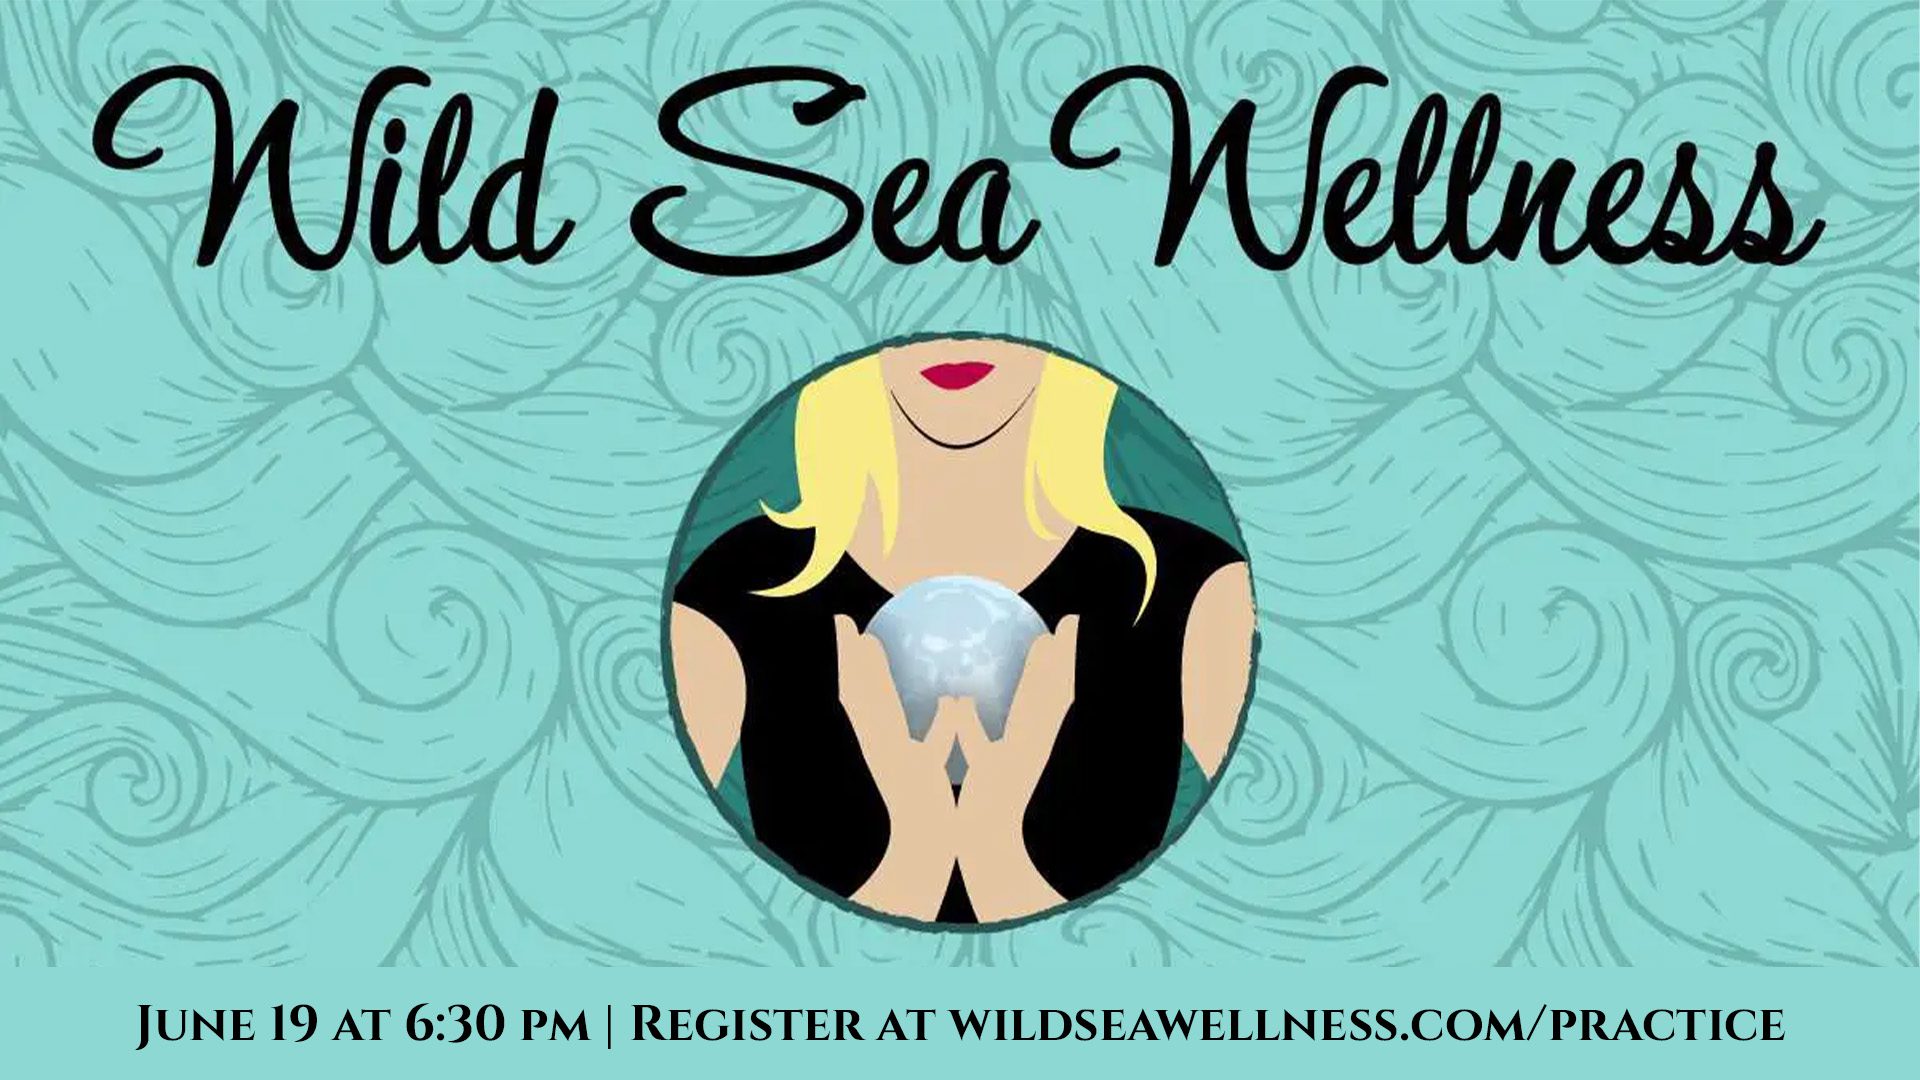 Check out our captivating promotional poster for Wild Sea Wellness, showcasing a unique design of a woman holding an illuminating sphere. Don't miss this occasion on June 19th at 6:30pm!